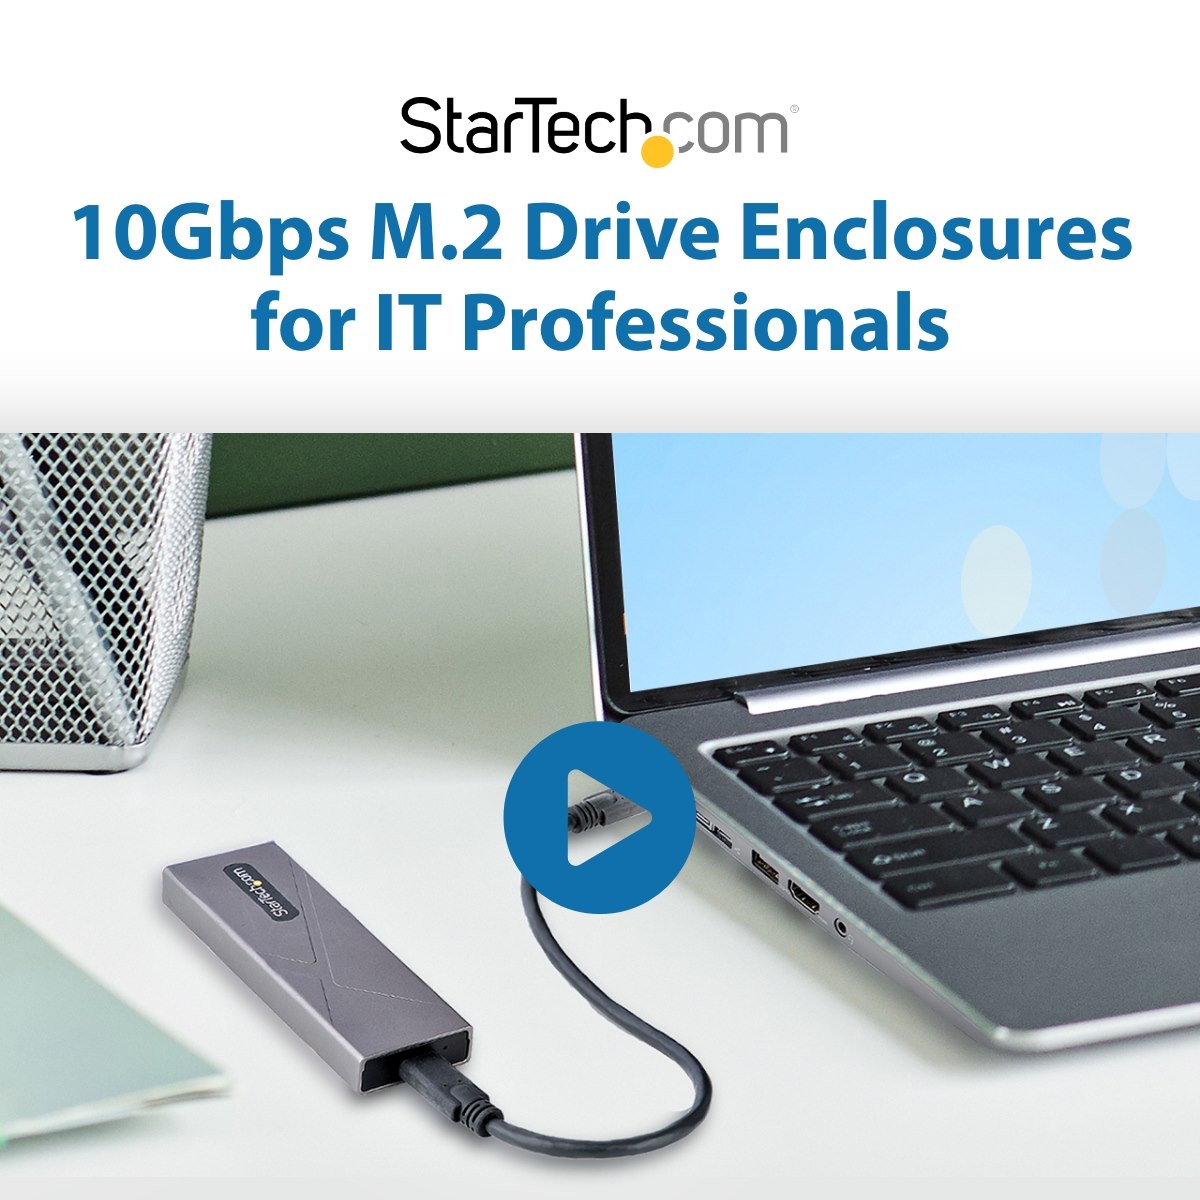 How to Install an M.2 SSD in an External USB Enclosure with NO TOOLS  (Tutorial) 